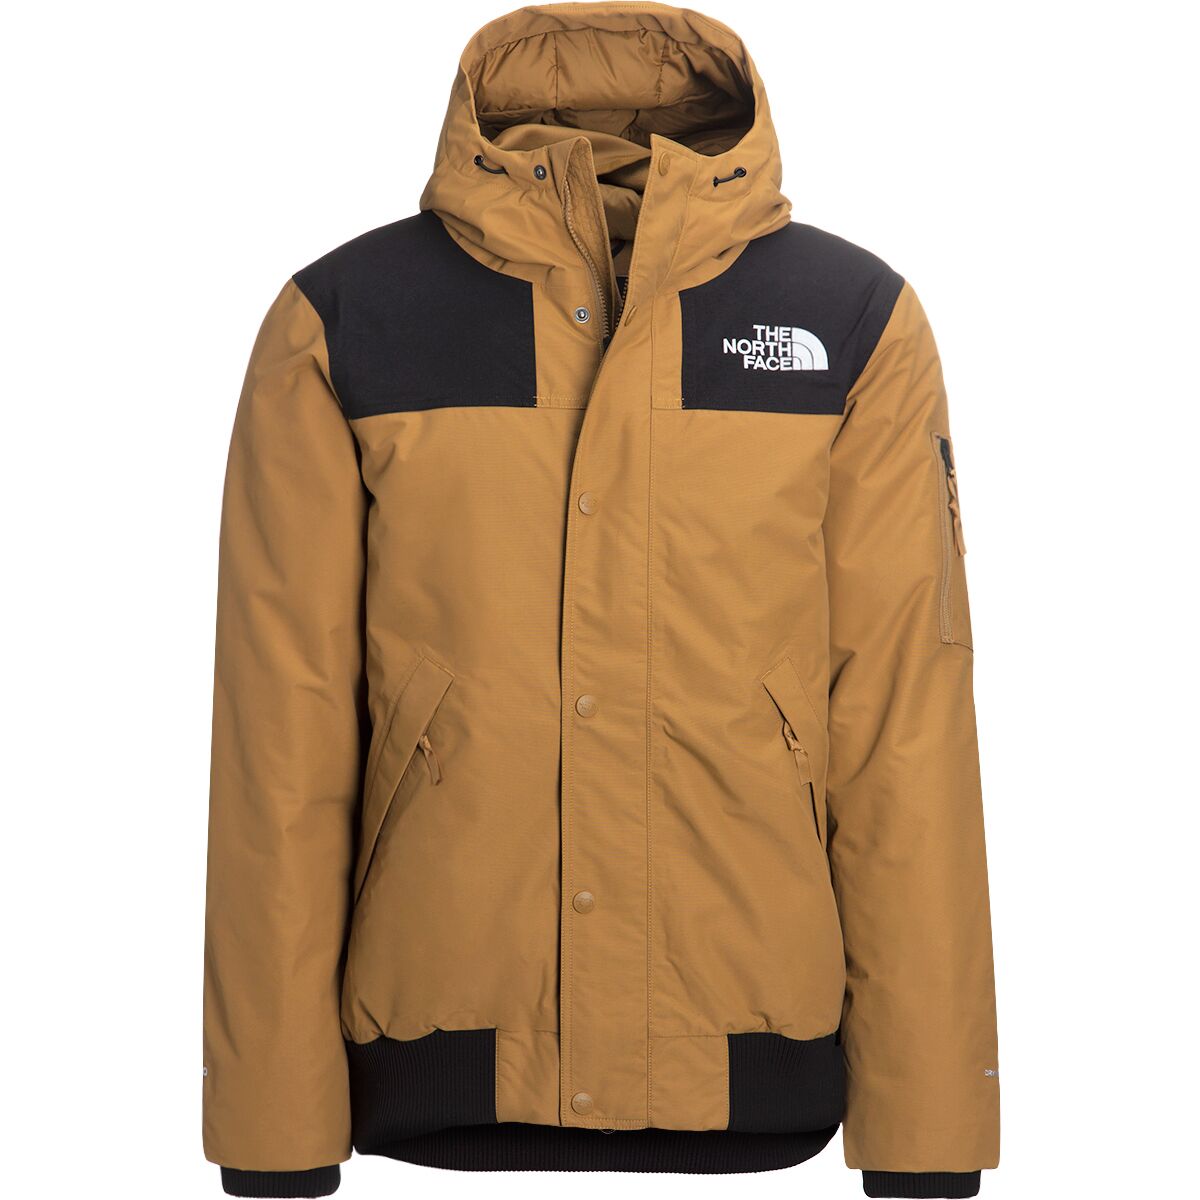 last year's north face jackets